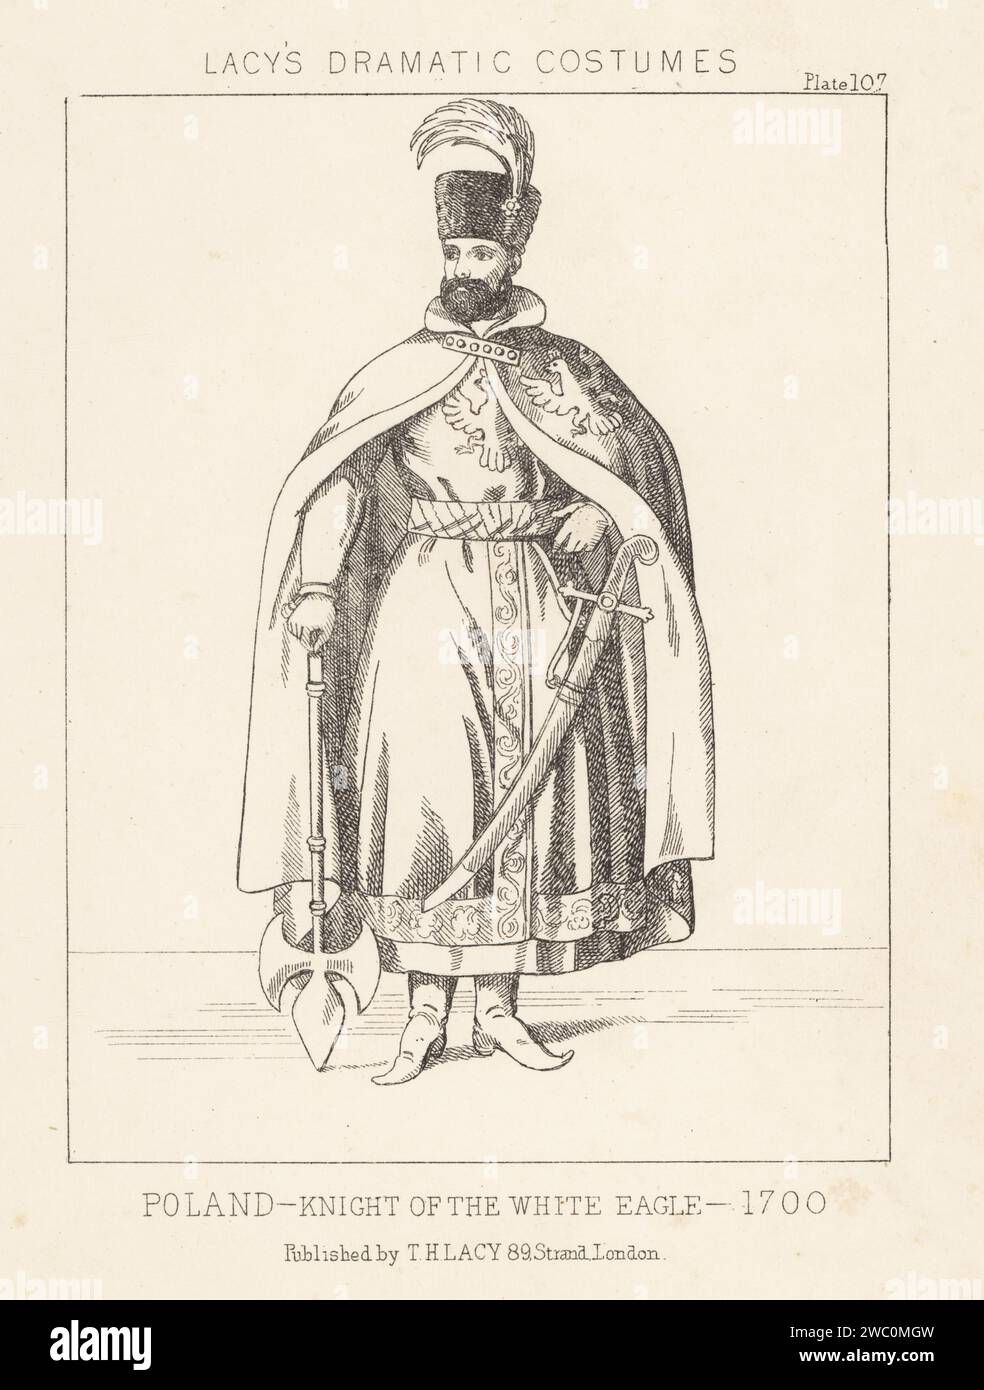 Knight of the Order of the White Eagle, Poland. Ceremonial robes with plumed fur hat, fur-lined cloak with embroidered eagle, tunic, boots, armed with battle axe and sabre. Founded by Augustus II the Strong, King of Poland, 1705. Lithograph from Thomas Hailes Lacy's Male Costumes, Historical, National and Dramatic in 200 Plates, London, 1865. Lacy (1809-1873) was a British actor, playwright, theatrical manager and publisher. Stock Photo